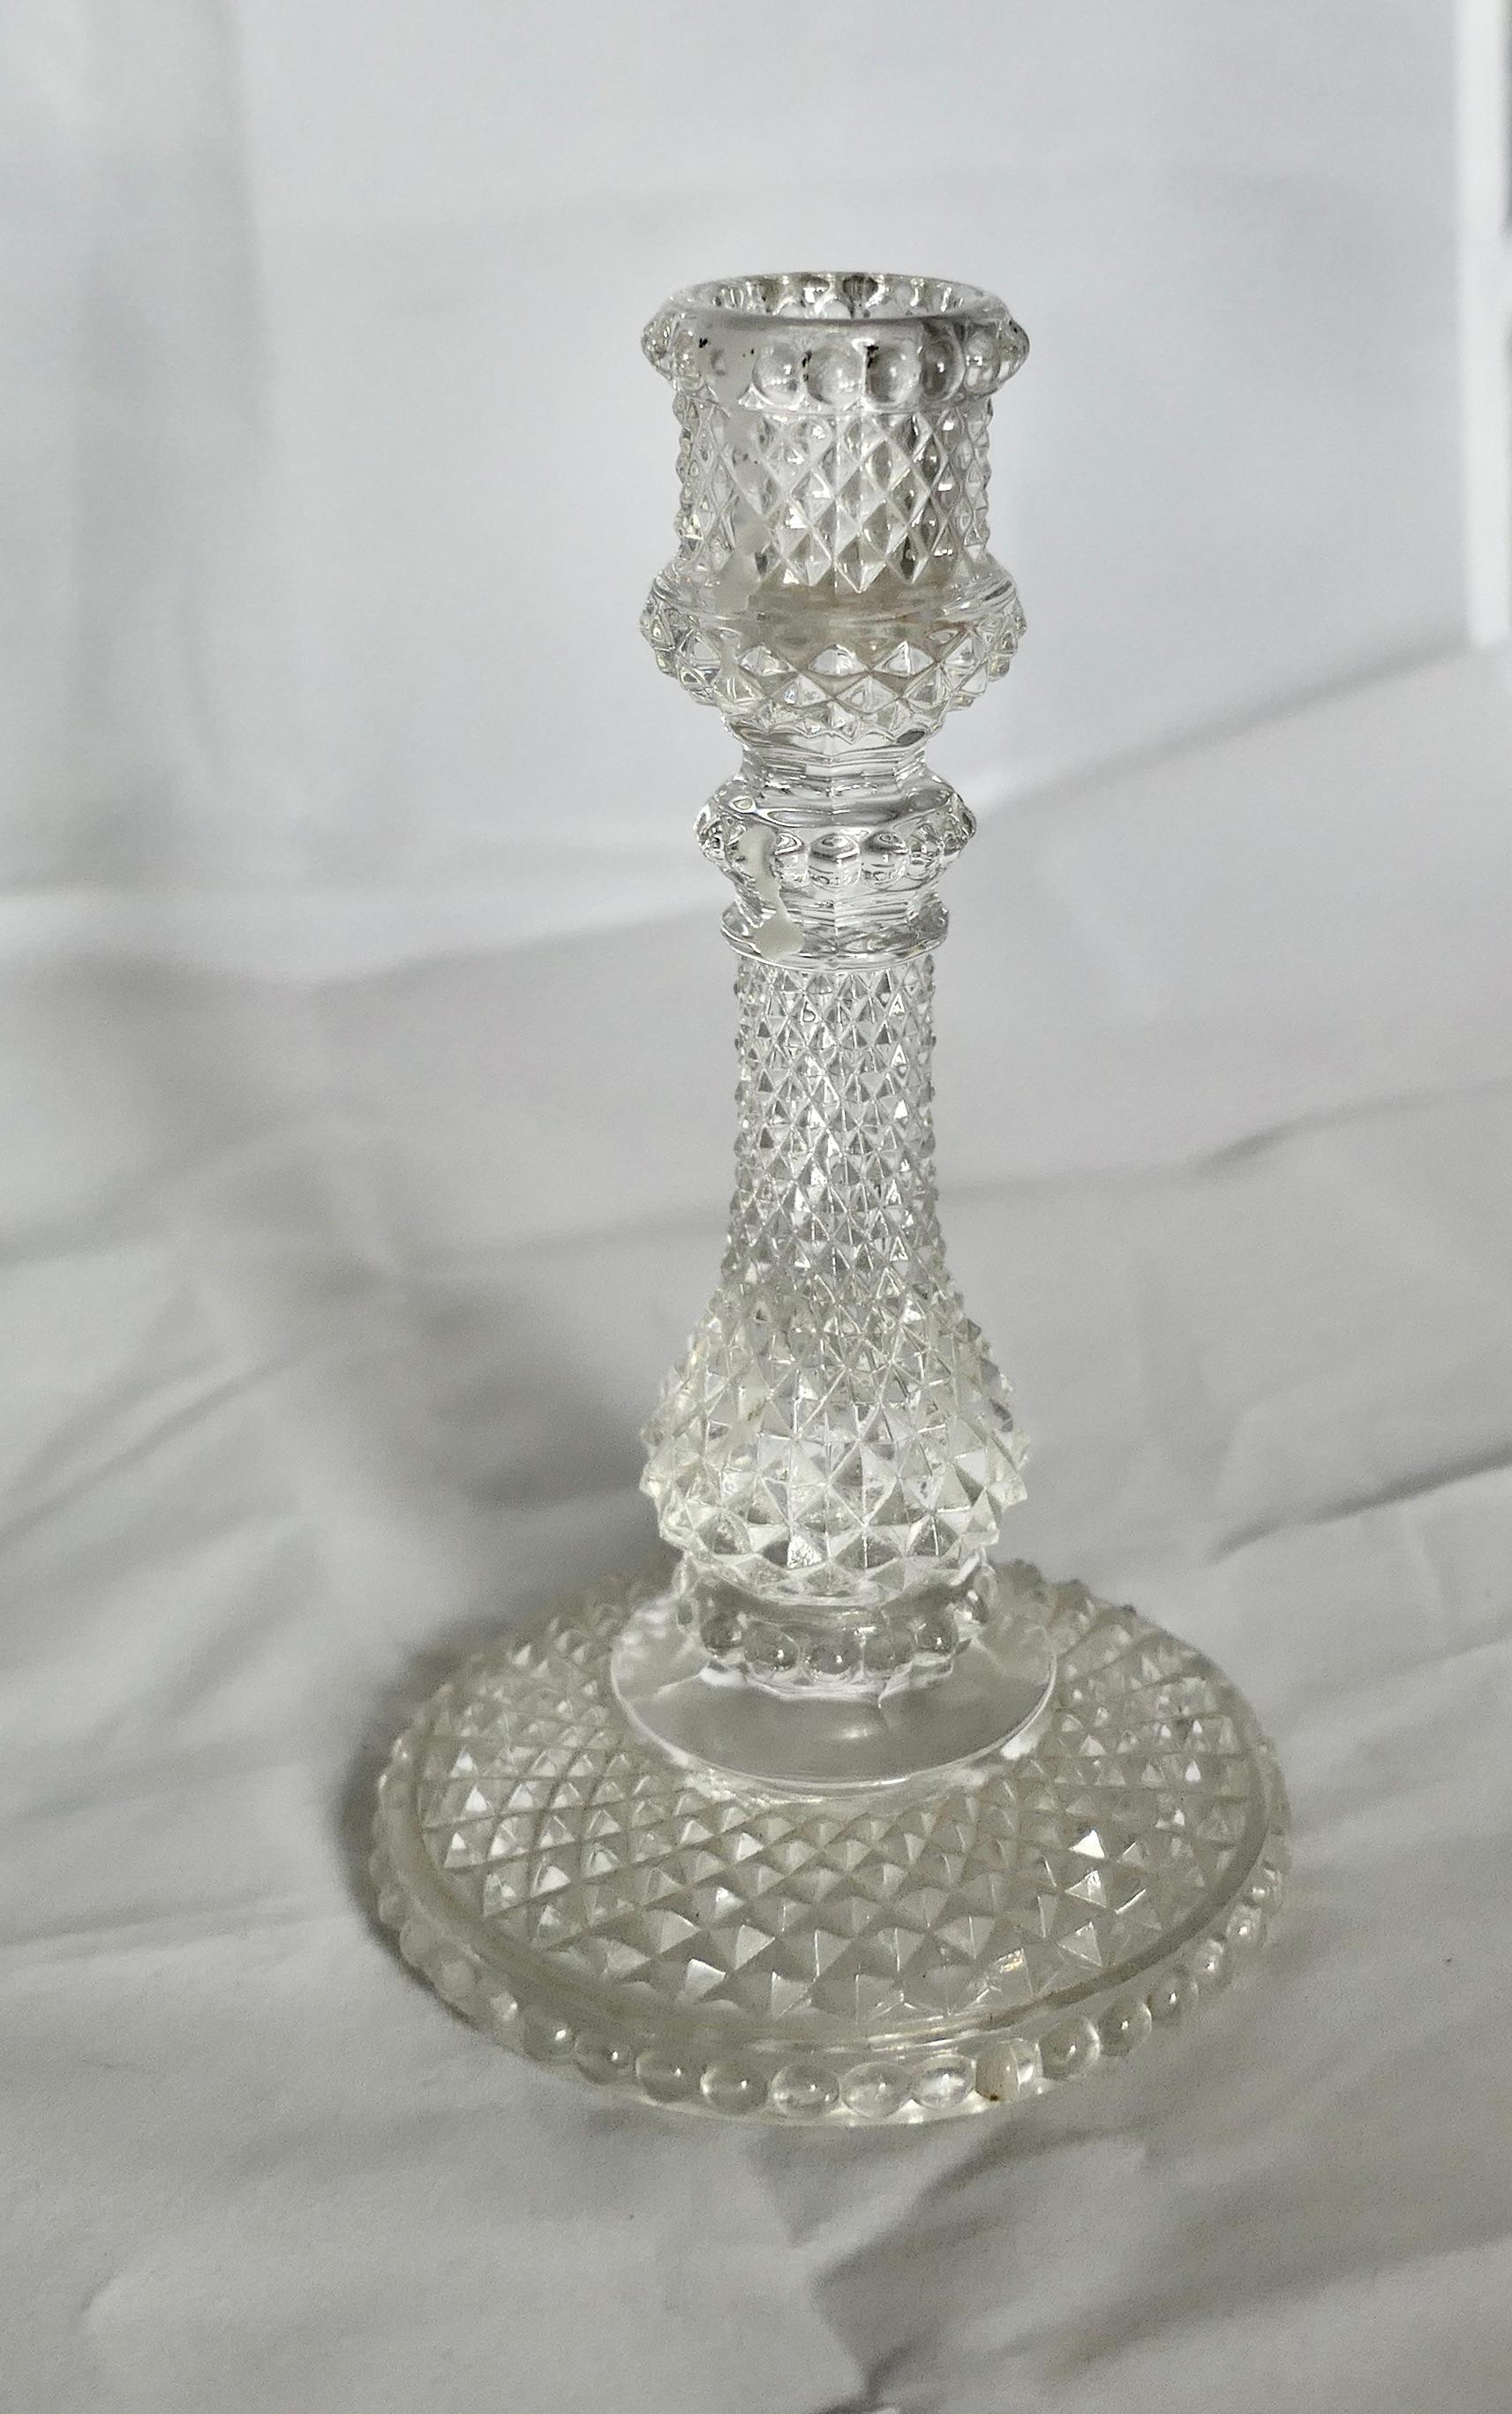 A Pair of Dainty Baccarat Crystal Zenith Candlesticks

A Lovely Pair of Table Candle Sticks, with a intensive Diamond faceted design to maximise the refraction of the light, very beautiful and not too large a size ideal for intimate dining 

These